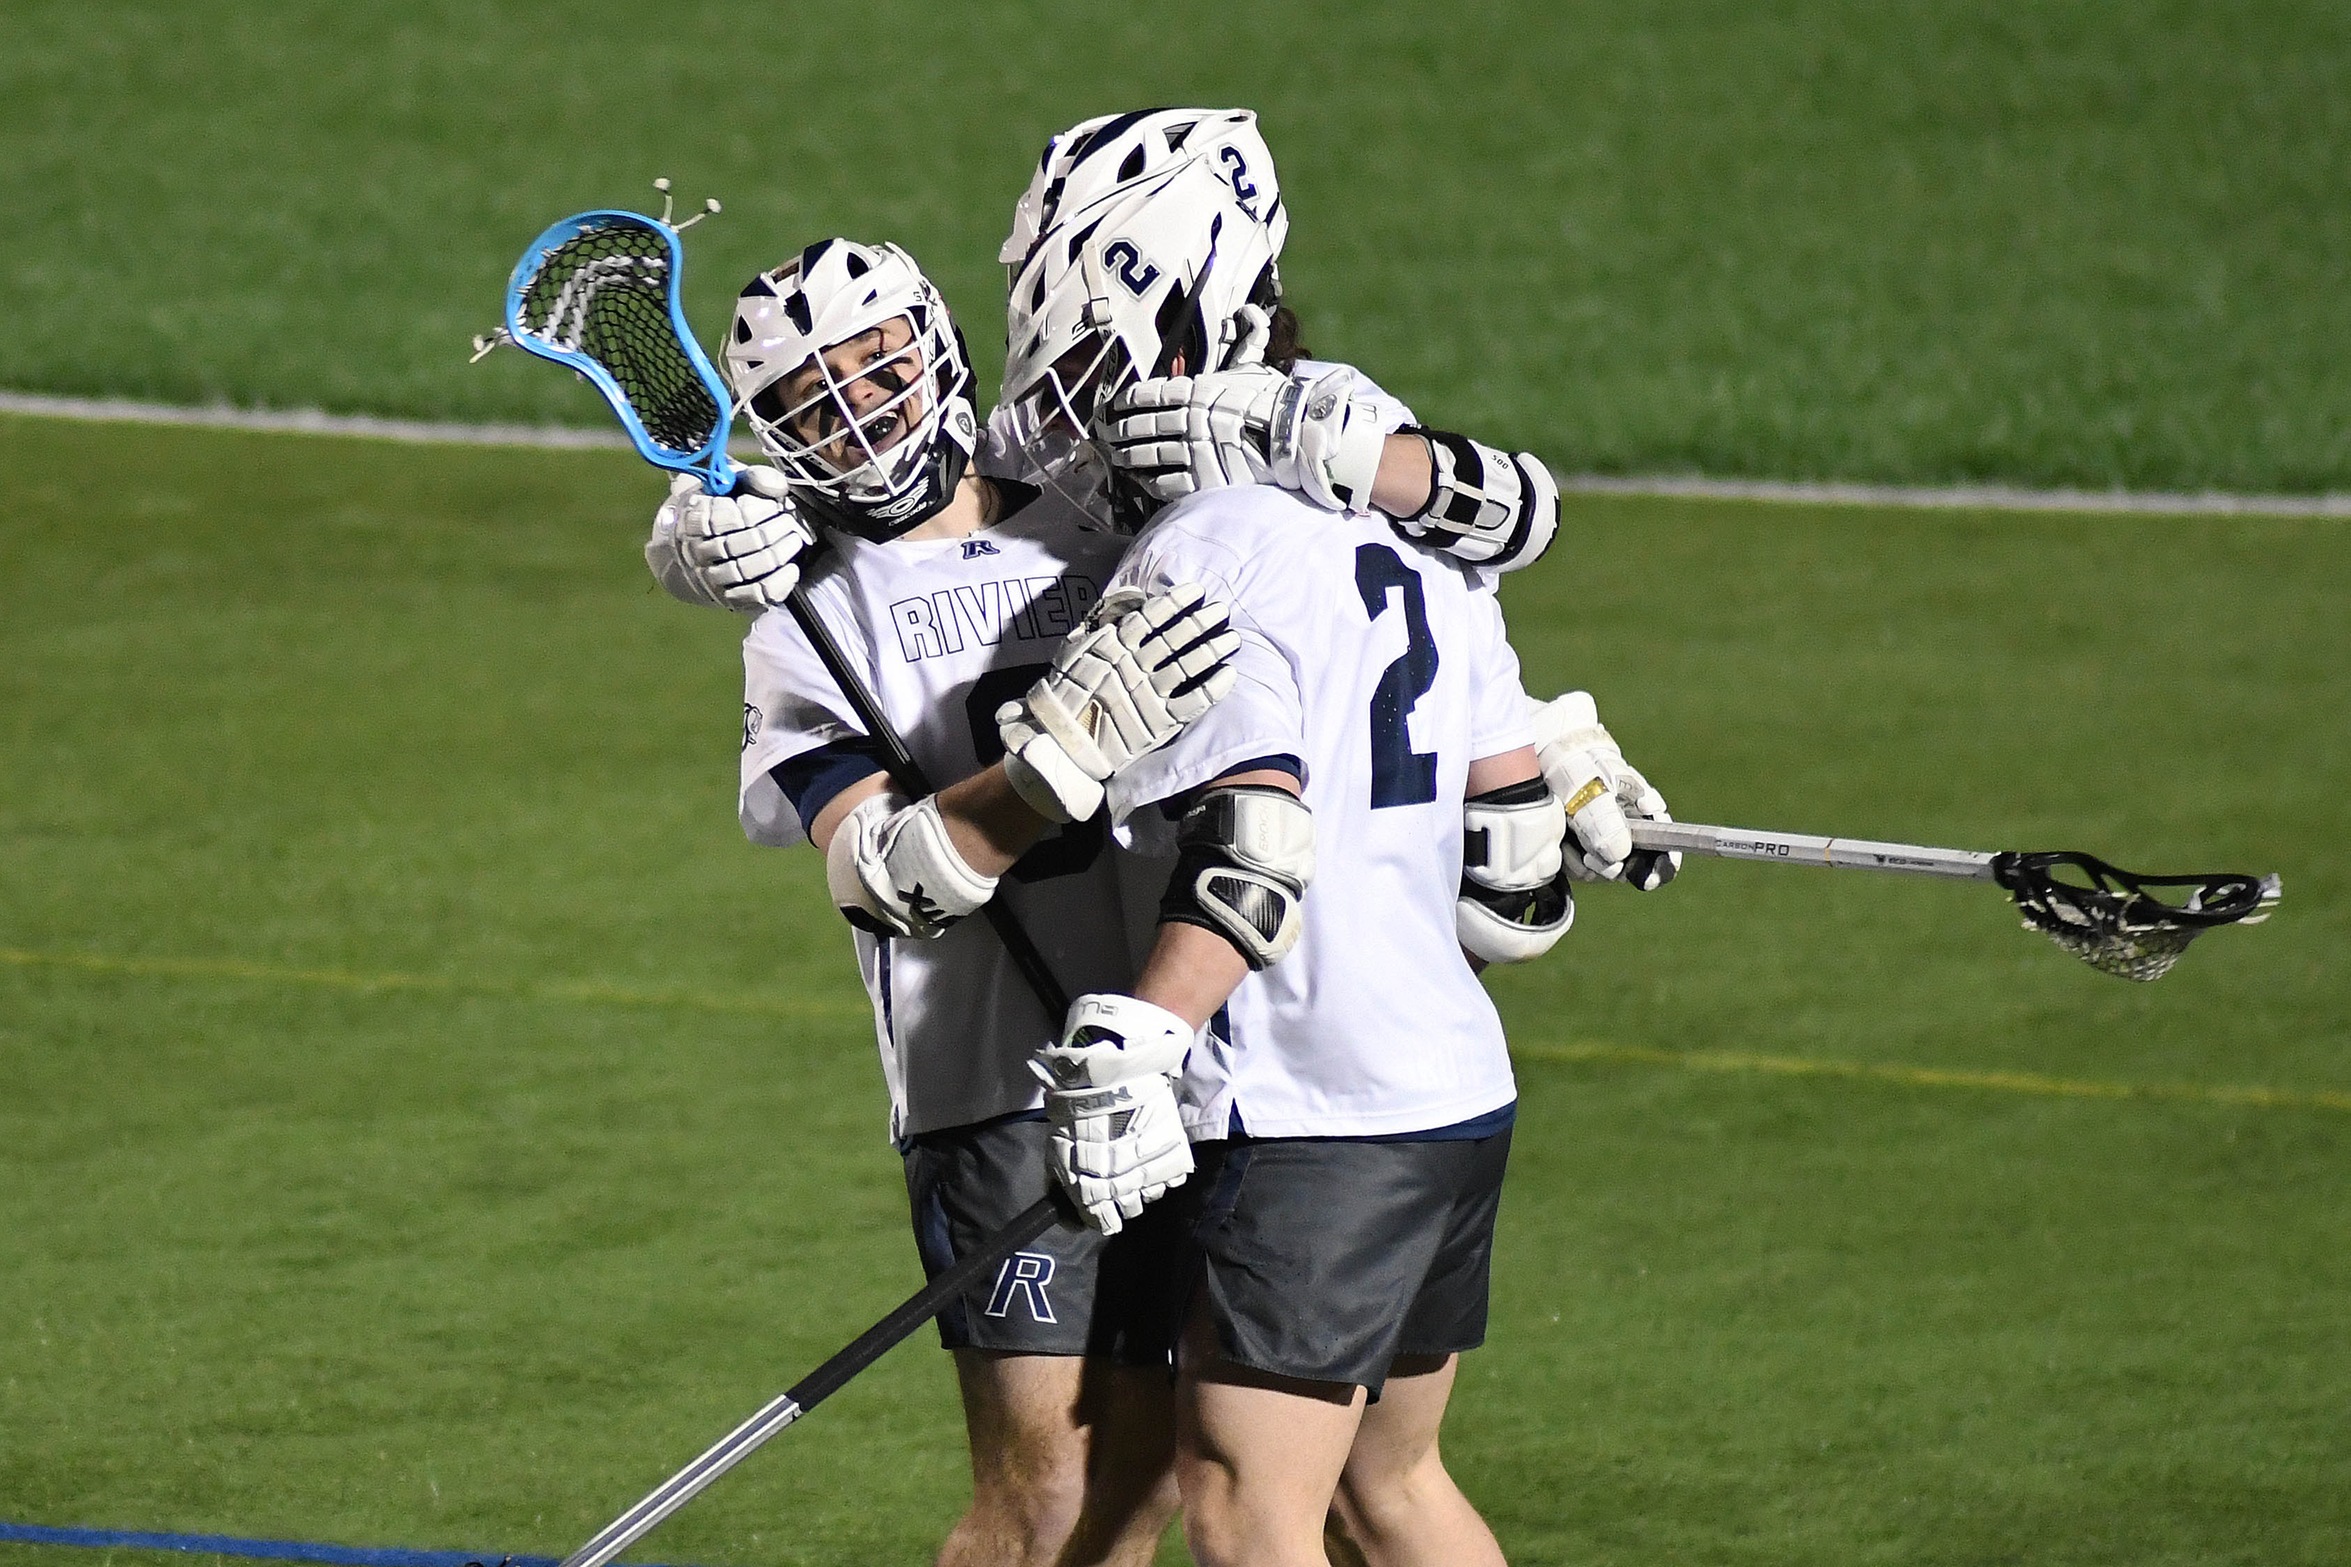 Zapatka’s Six Goals Lifts Men’s Lacrosse Over Mitchell